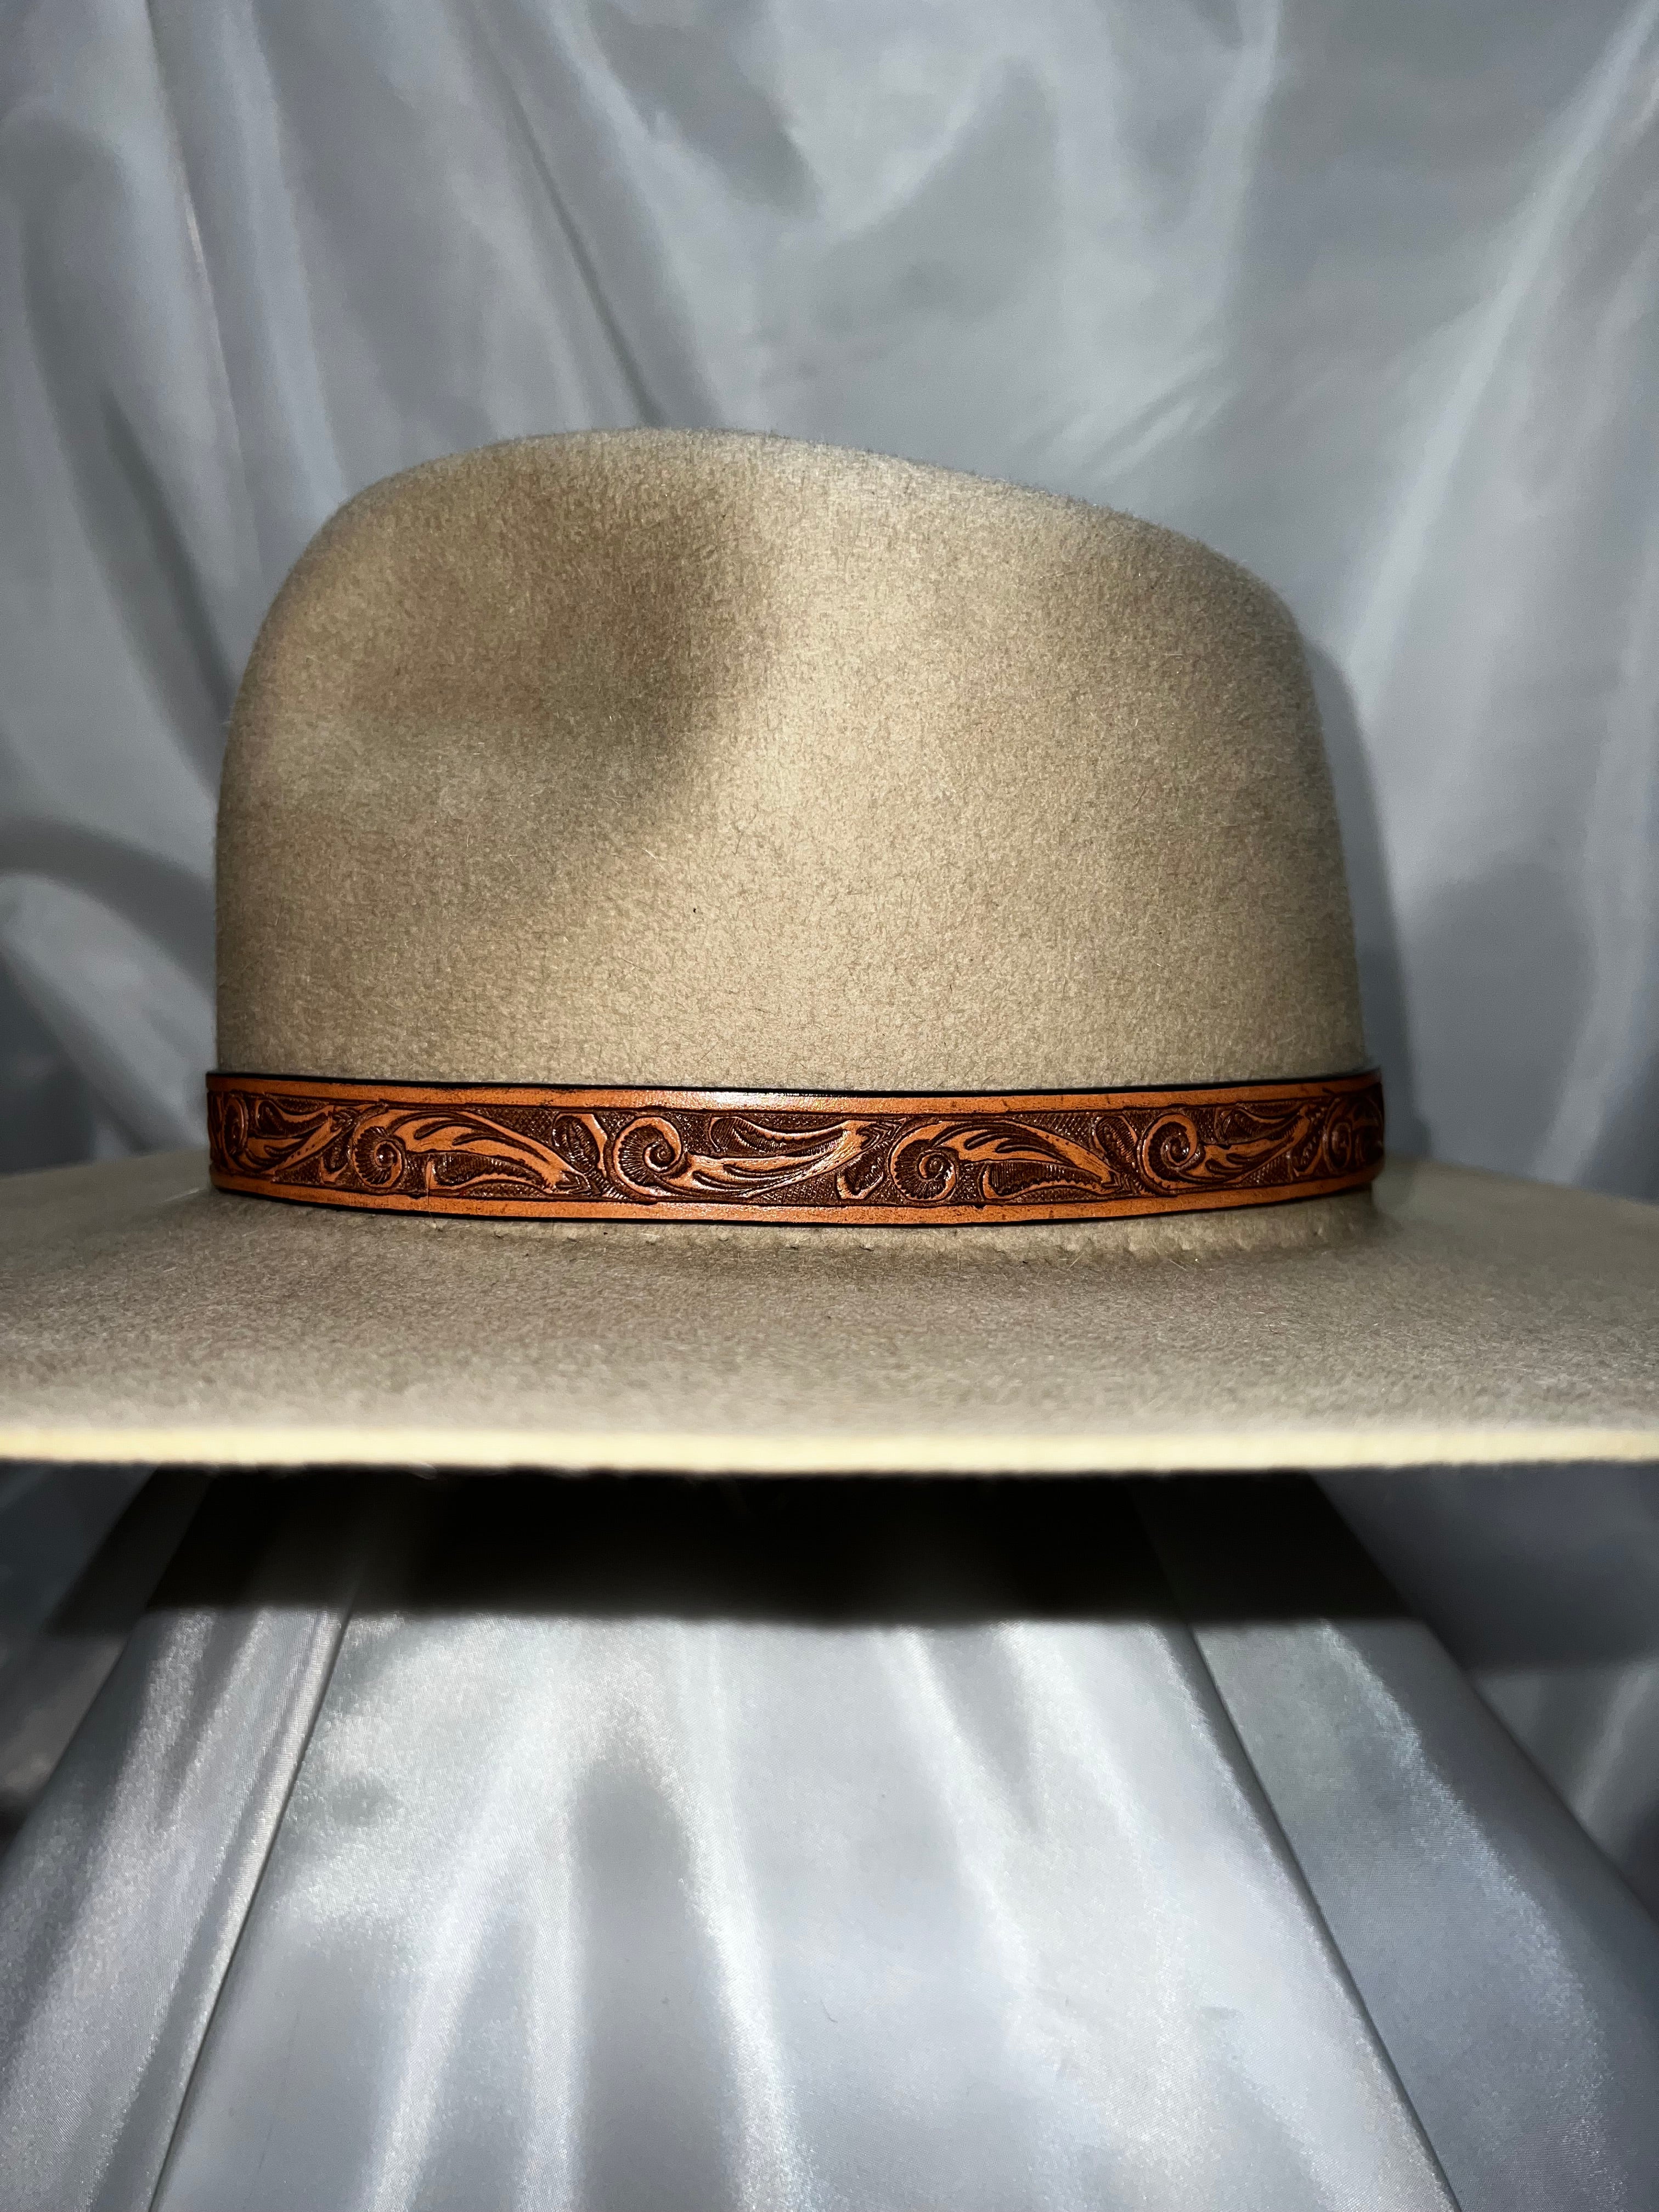 Brown on Tan 1 inch Leather hat band for Panama Hats